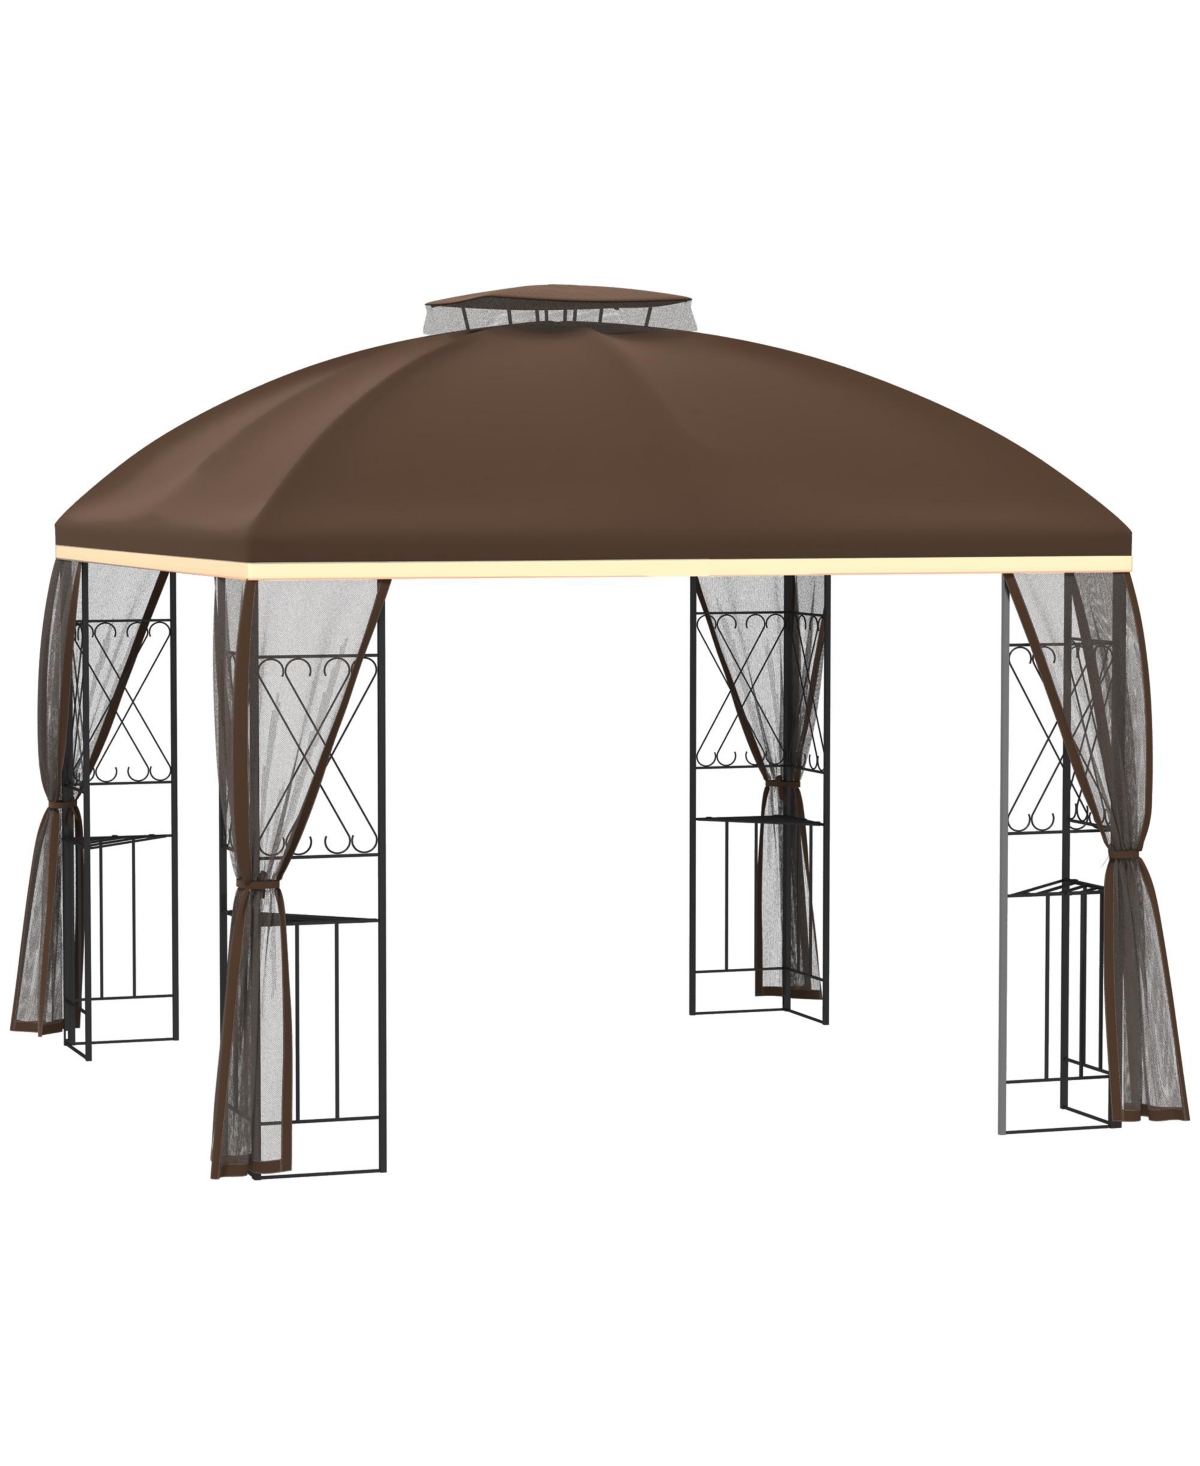 10' x 10' Patio Gazebo, Double Roof Outdoor Gazebo Canopy Shelter with Removable Mesh Netting, Display Shelves, Brown - Brown